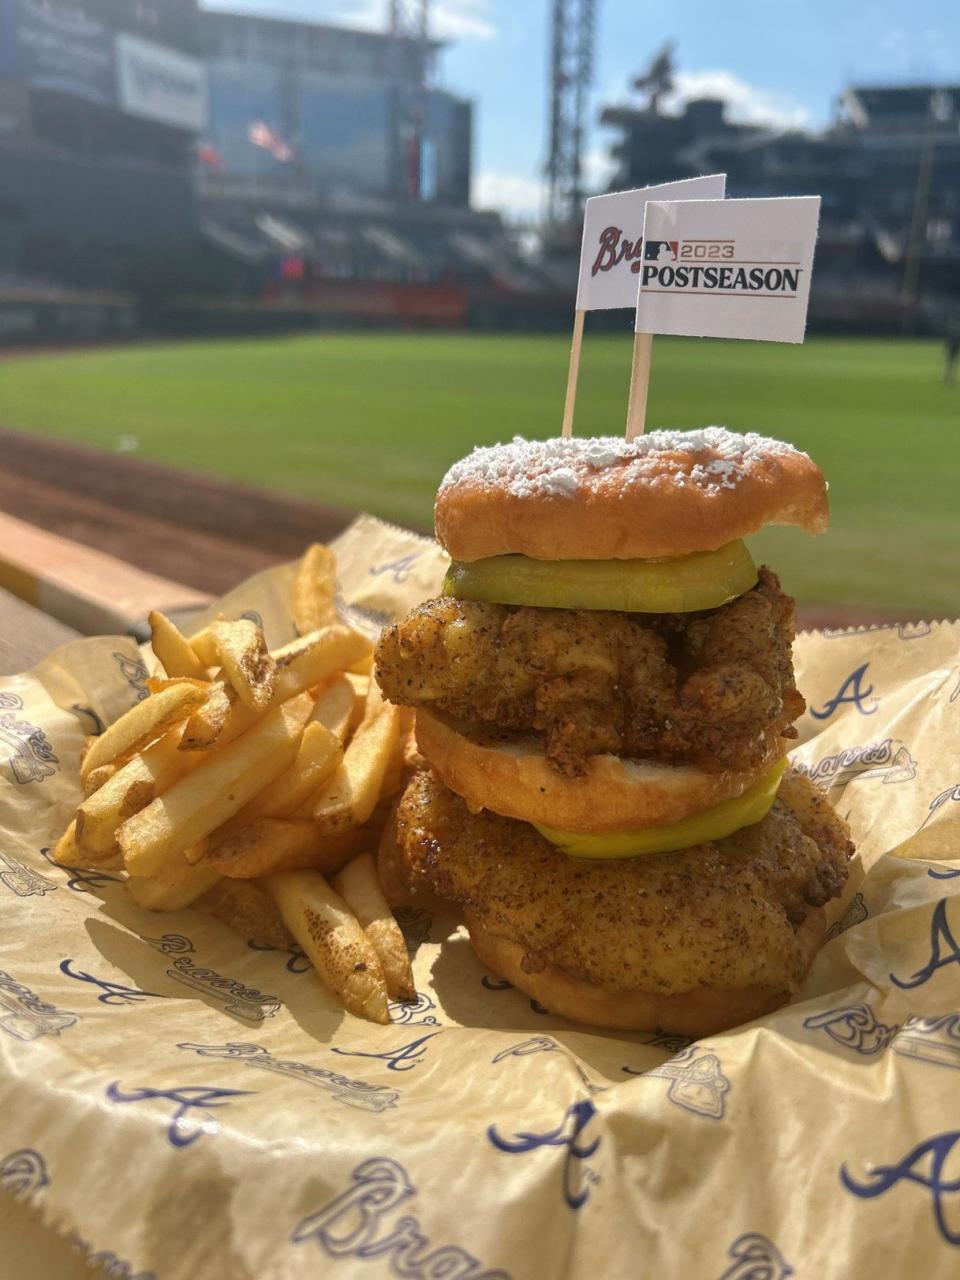 “Chicken ain’t nothing but a bird Blue”: Double stack fried wet lemon pepper free-range chicken breast sandwiched between 3 glazed donuts and Southern angry pickled green tomatoes finished with peach bourbon coulis and powdered sugar. Available at 1871 Grille near sections 215 and 239.